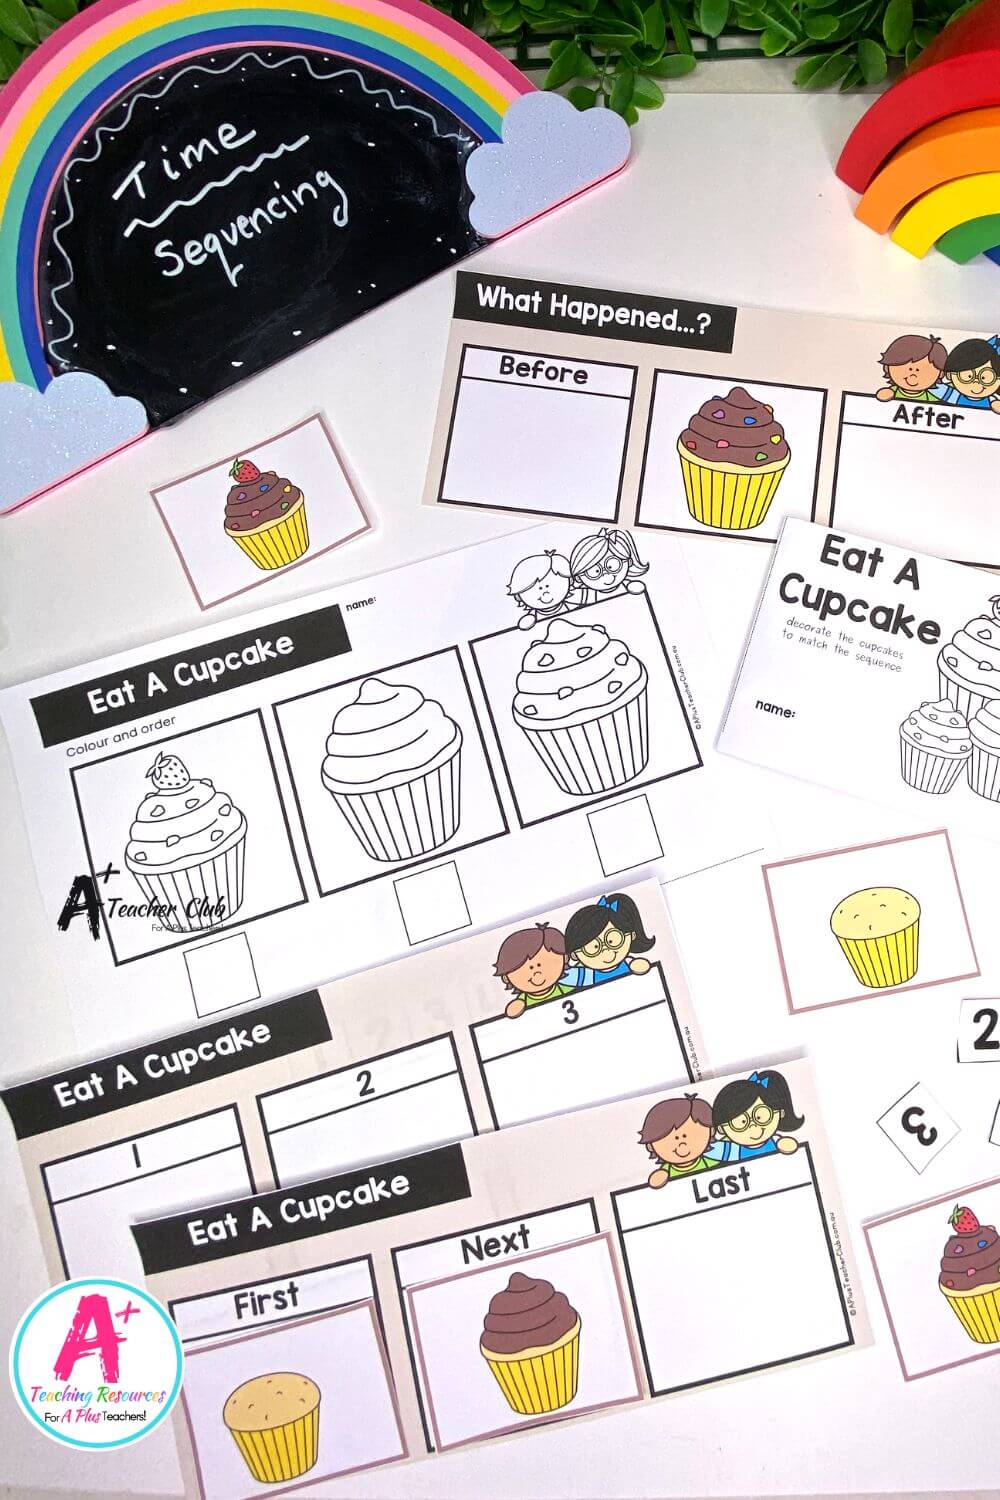 3-Step Sequencing Everyday Events - Decorate A Cupcake Activities Pack